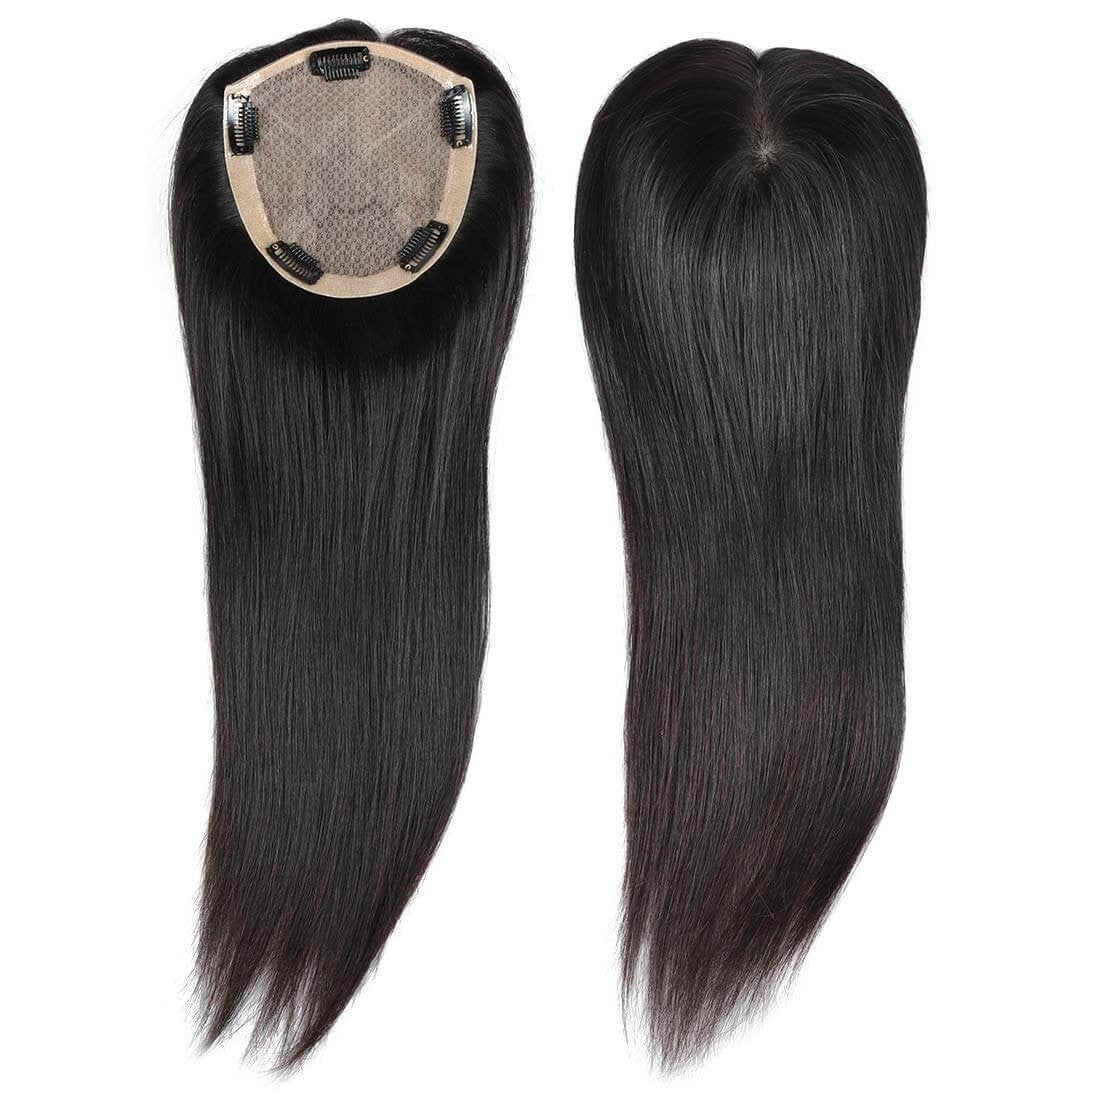 Wavy Natural Silk Top Human Hair toppers for womens toupee half wigs top hair pieces